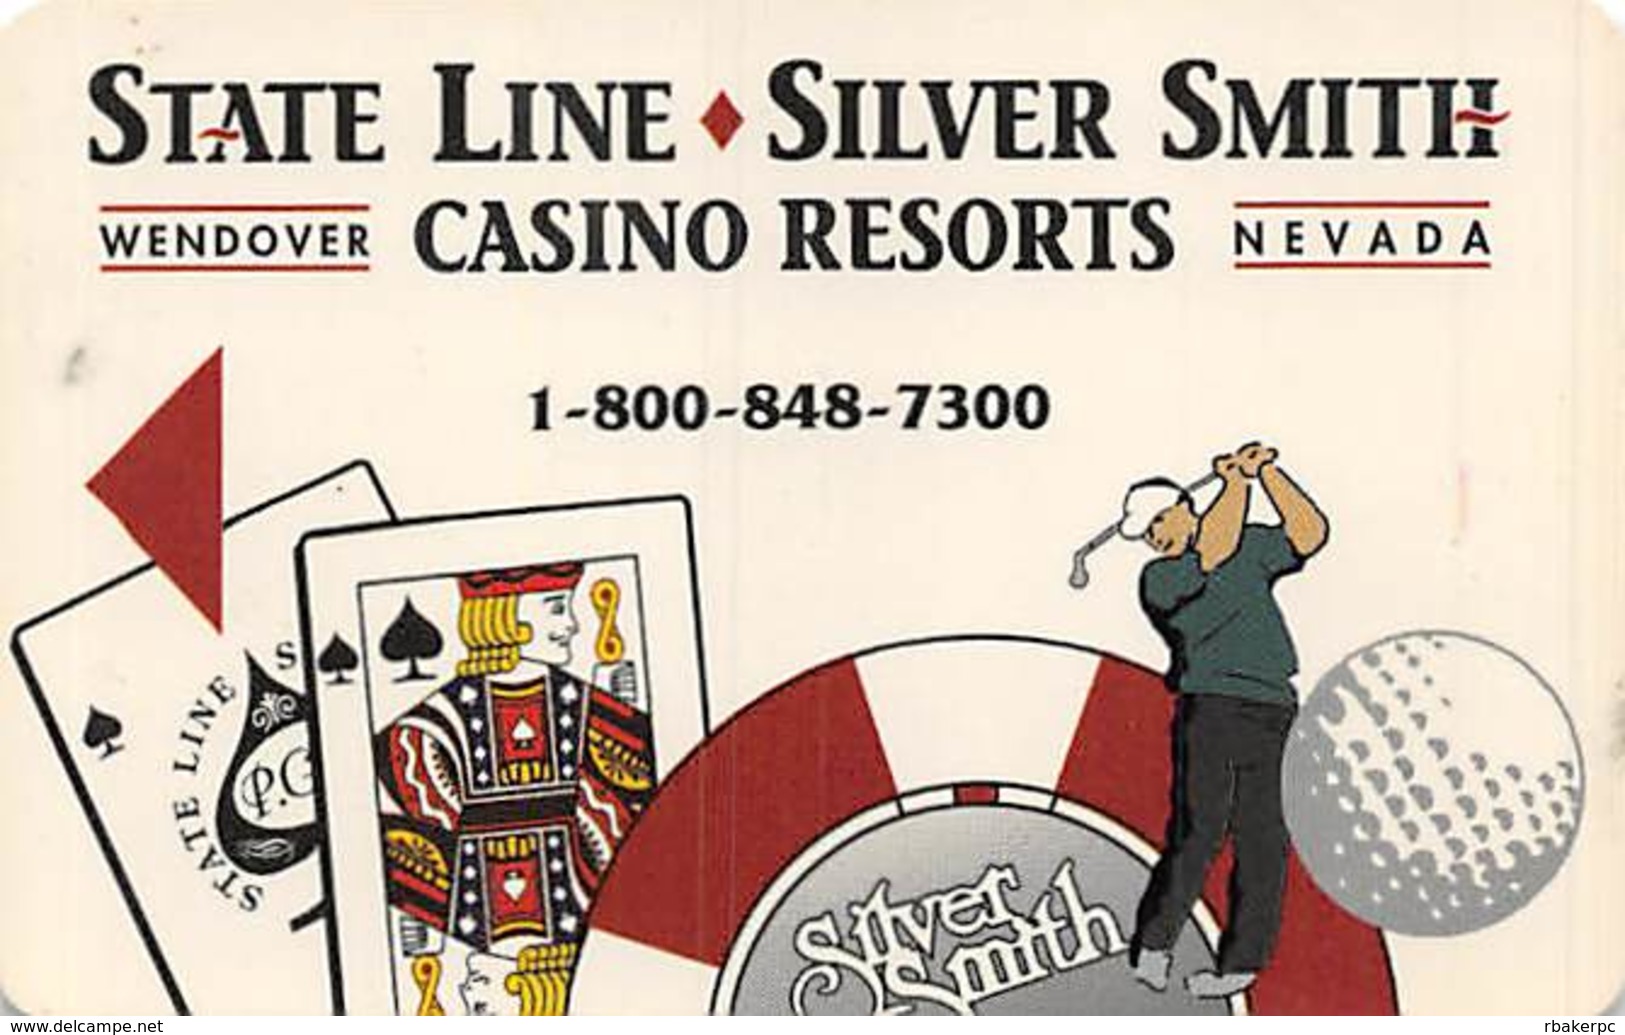 State Line & Silver Smith Casinos Wendover NV - Hotel Room Key Card - Hotel Keycards